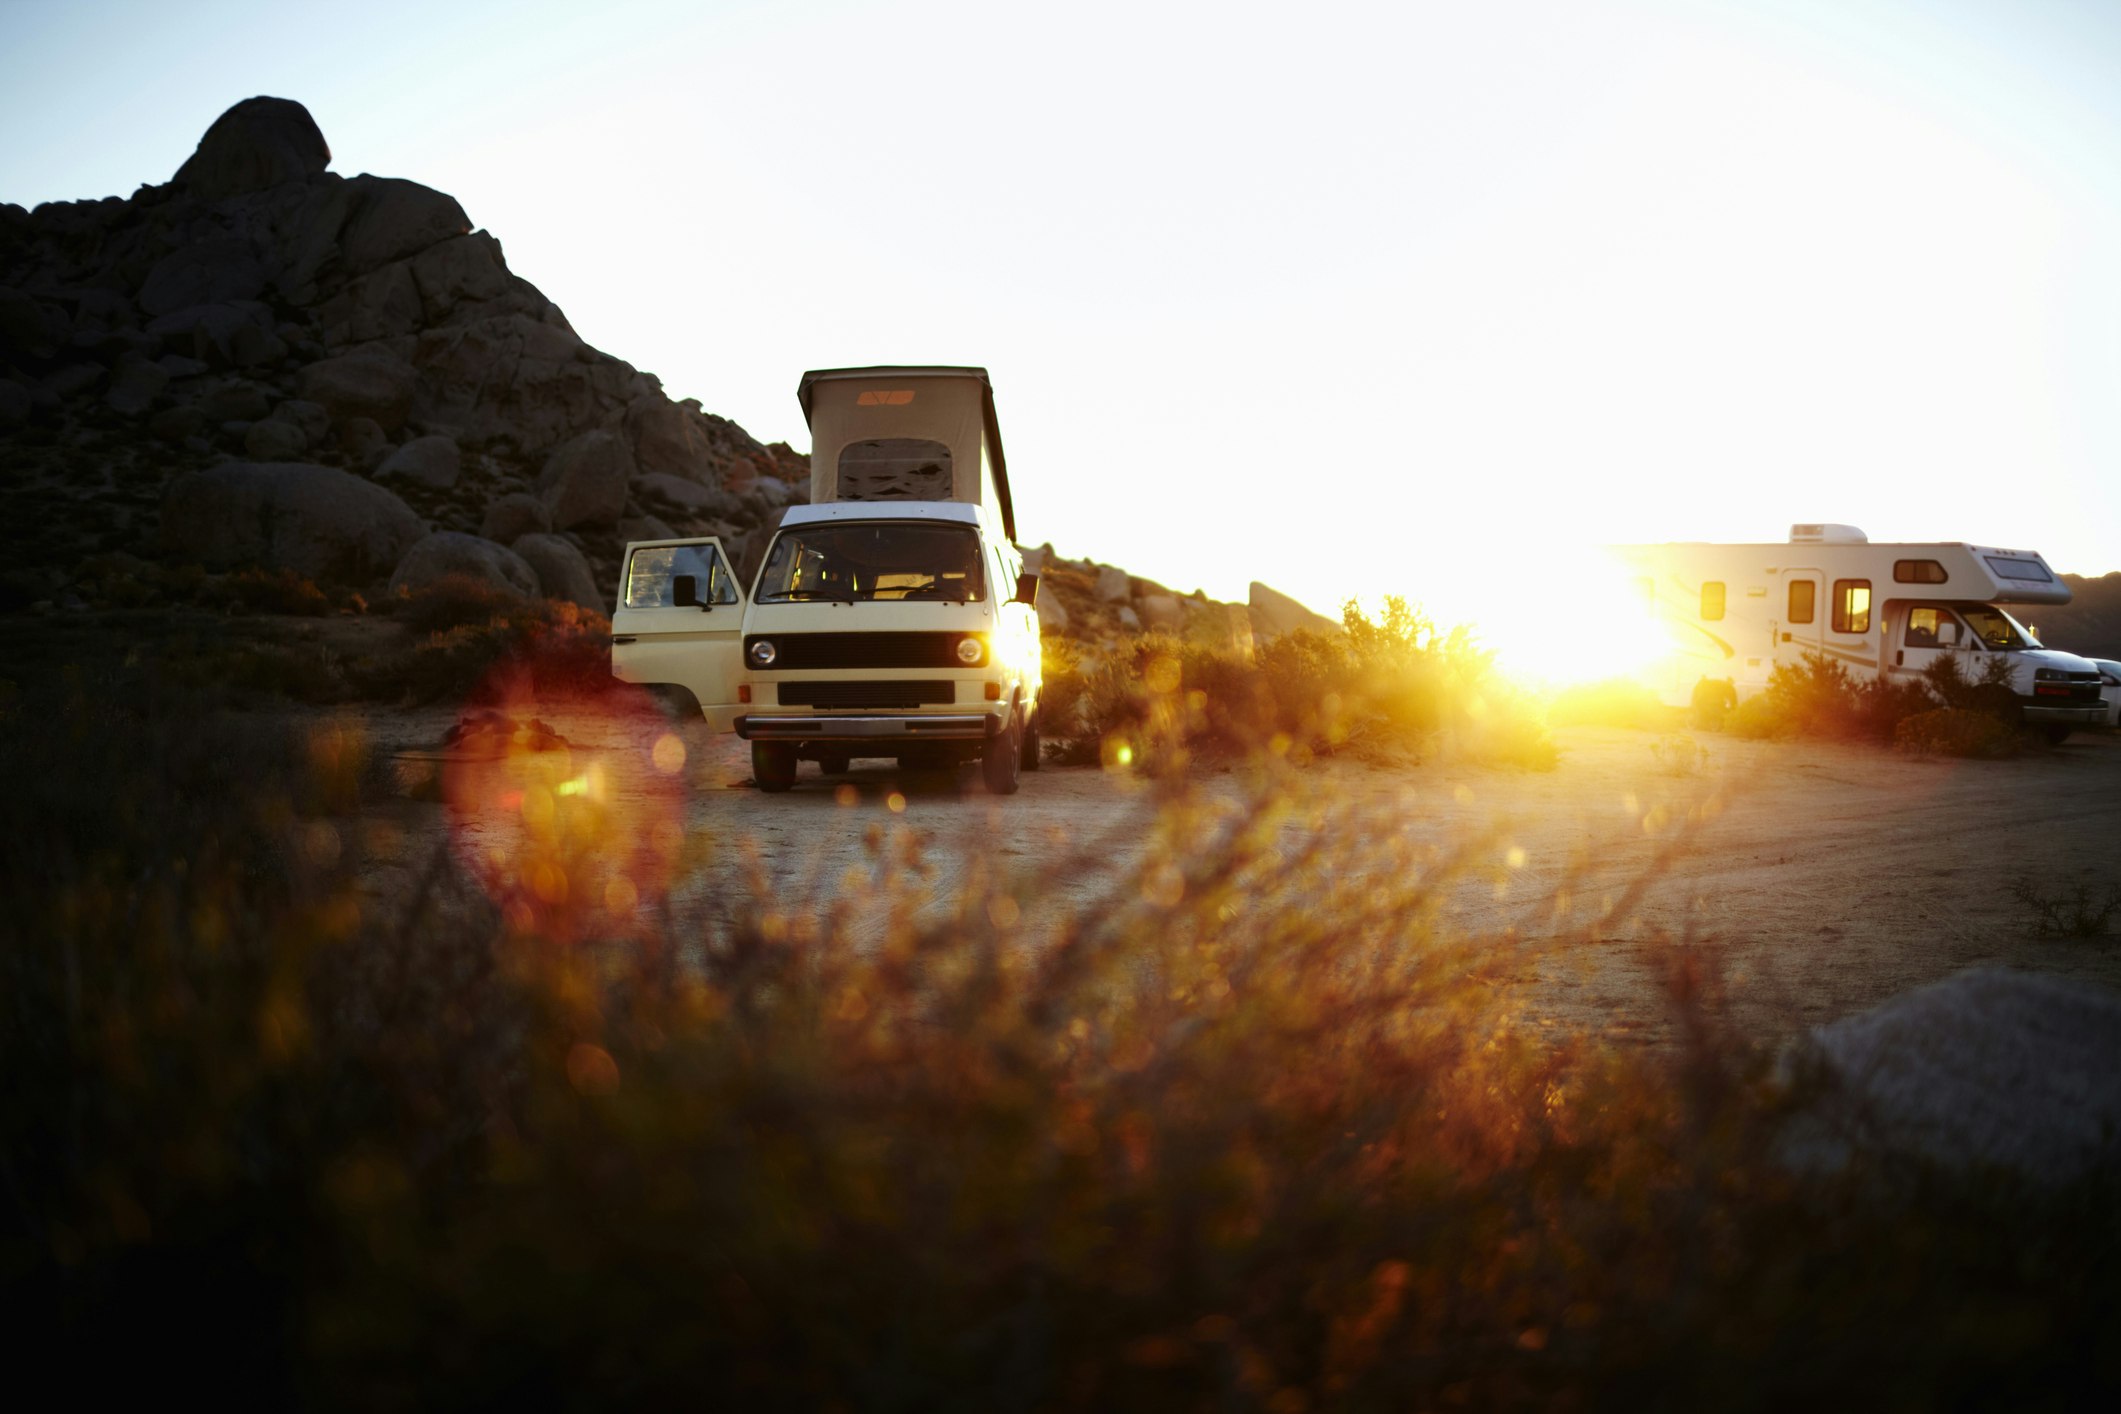 Travel News - A camper van, a classic design, and an iconic travelling vehicle in Yosemite national park, at sunset.